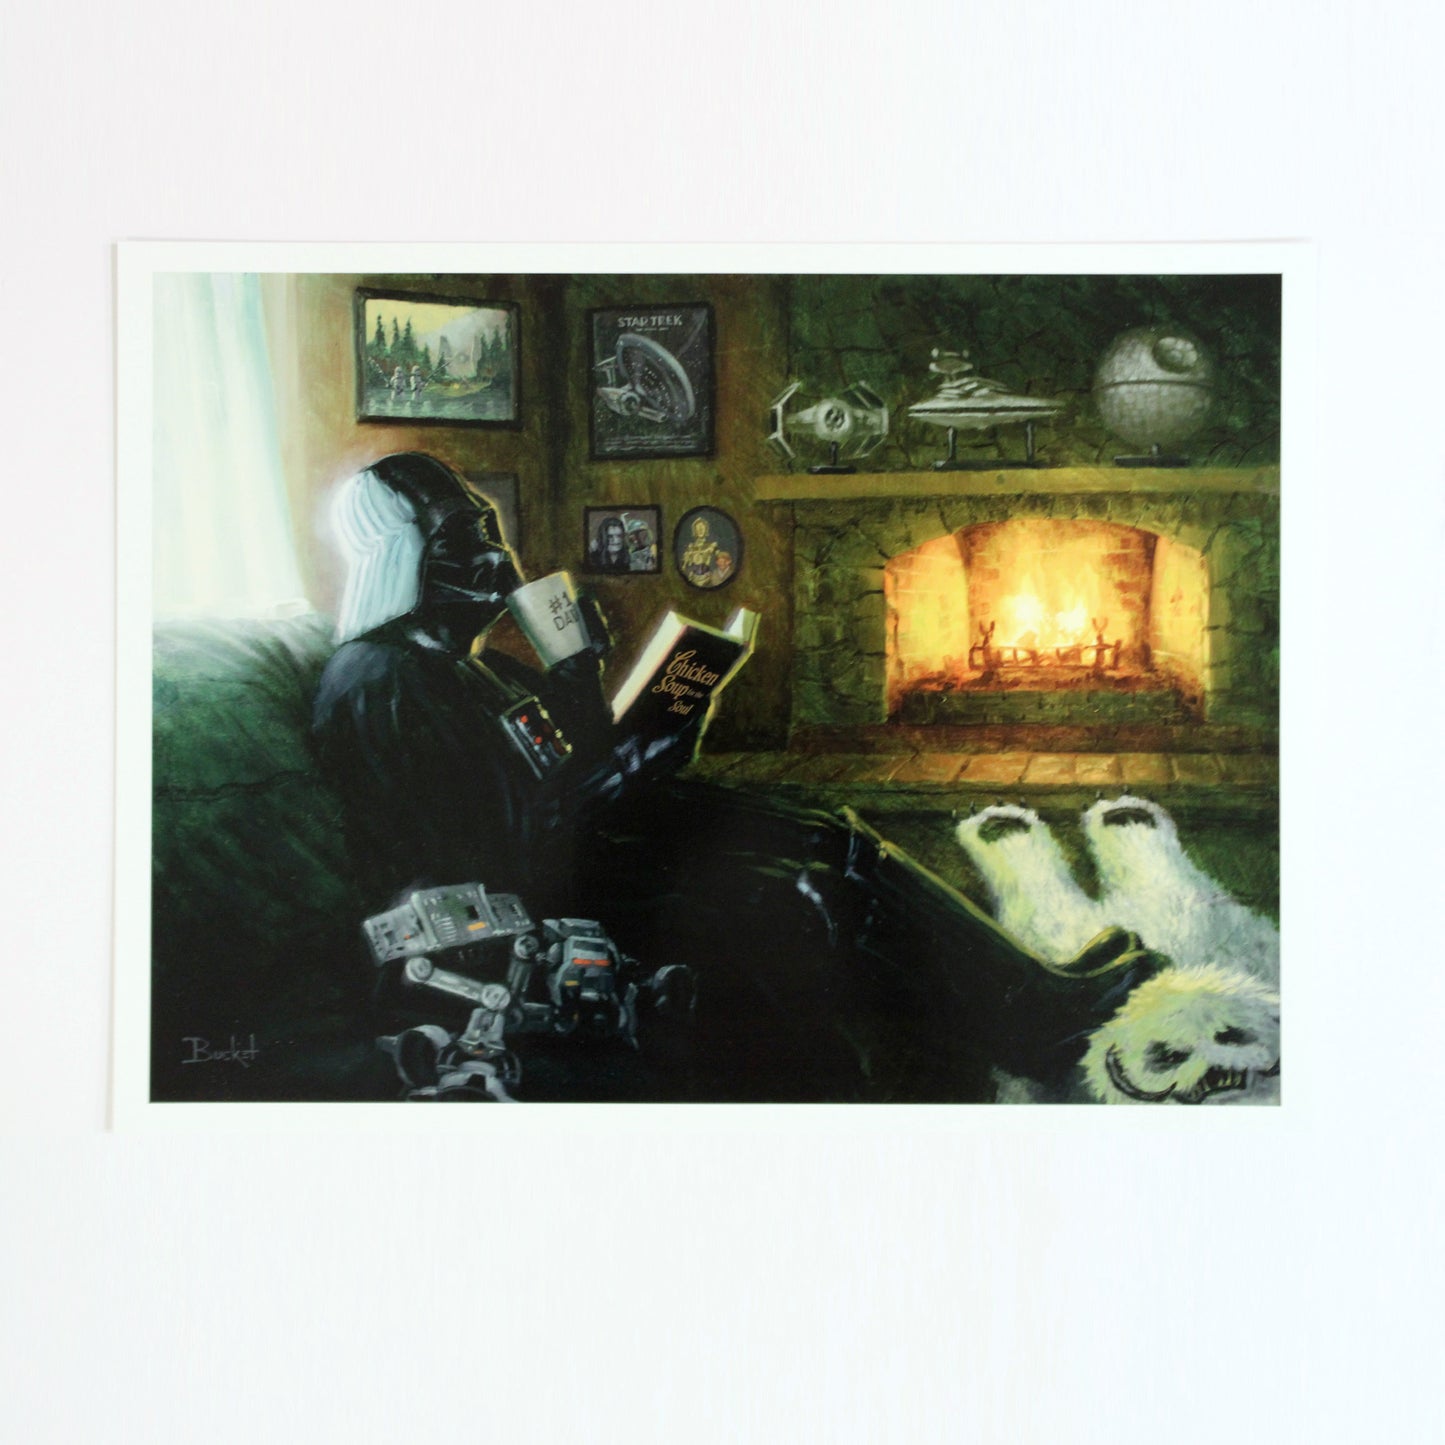 Darth Vader by the Fire "Evil Takes a Day Off" (Star Wars) Parody Art Print